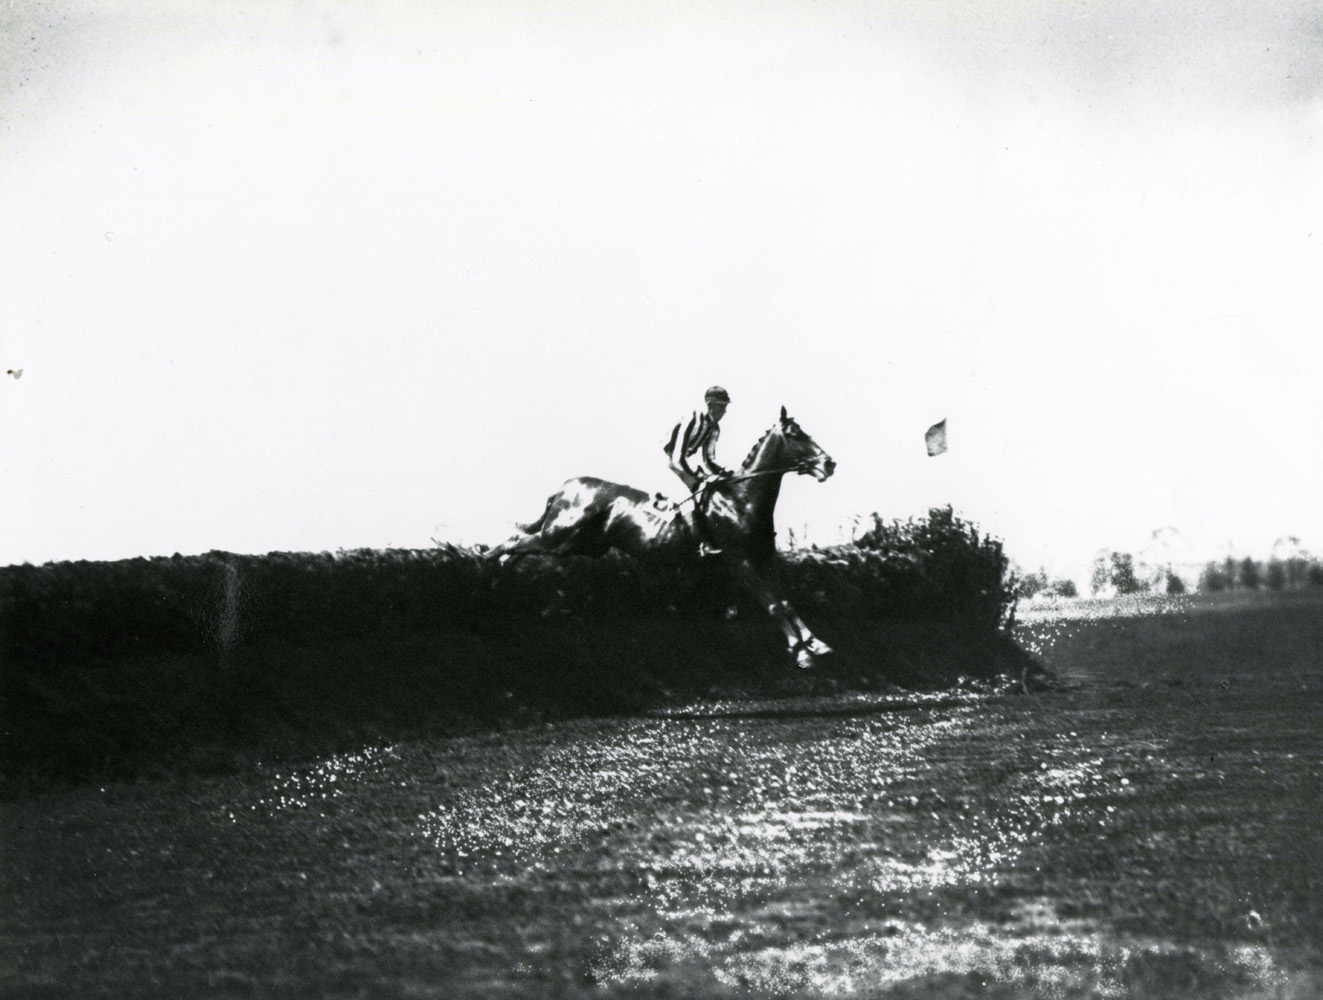 Fairmount (J. Lewis up) taking a jump (Keeneland Library Cook Collection/Museum Collection)